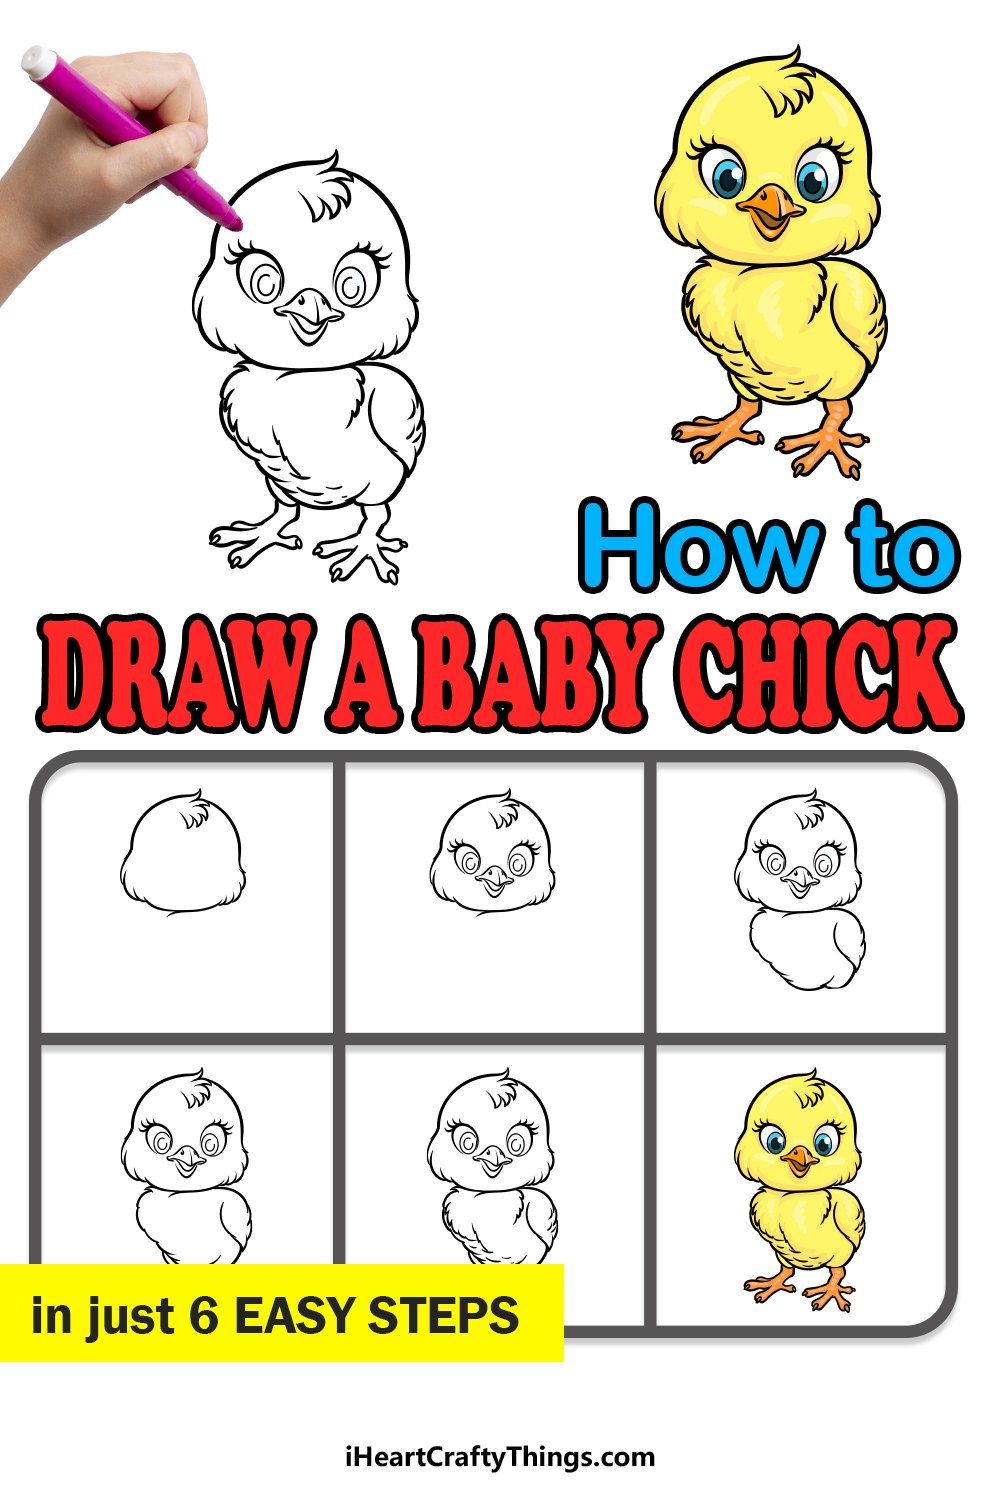 how to draw a Baby Chick in 6 easy steps